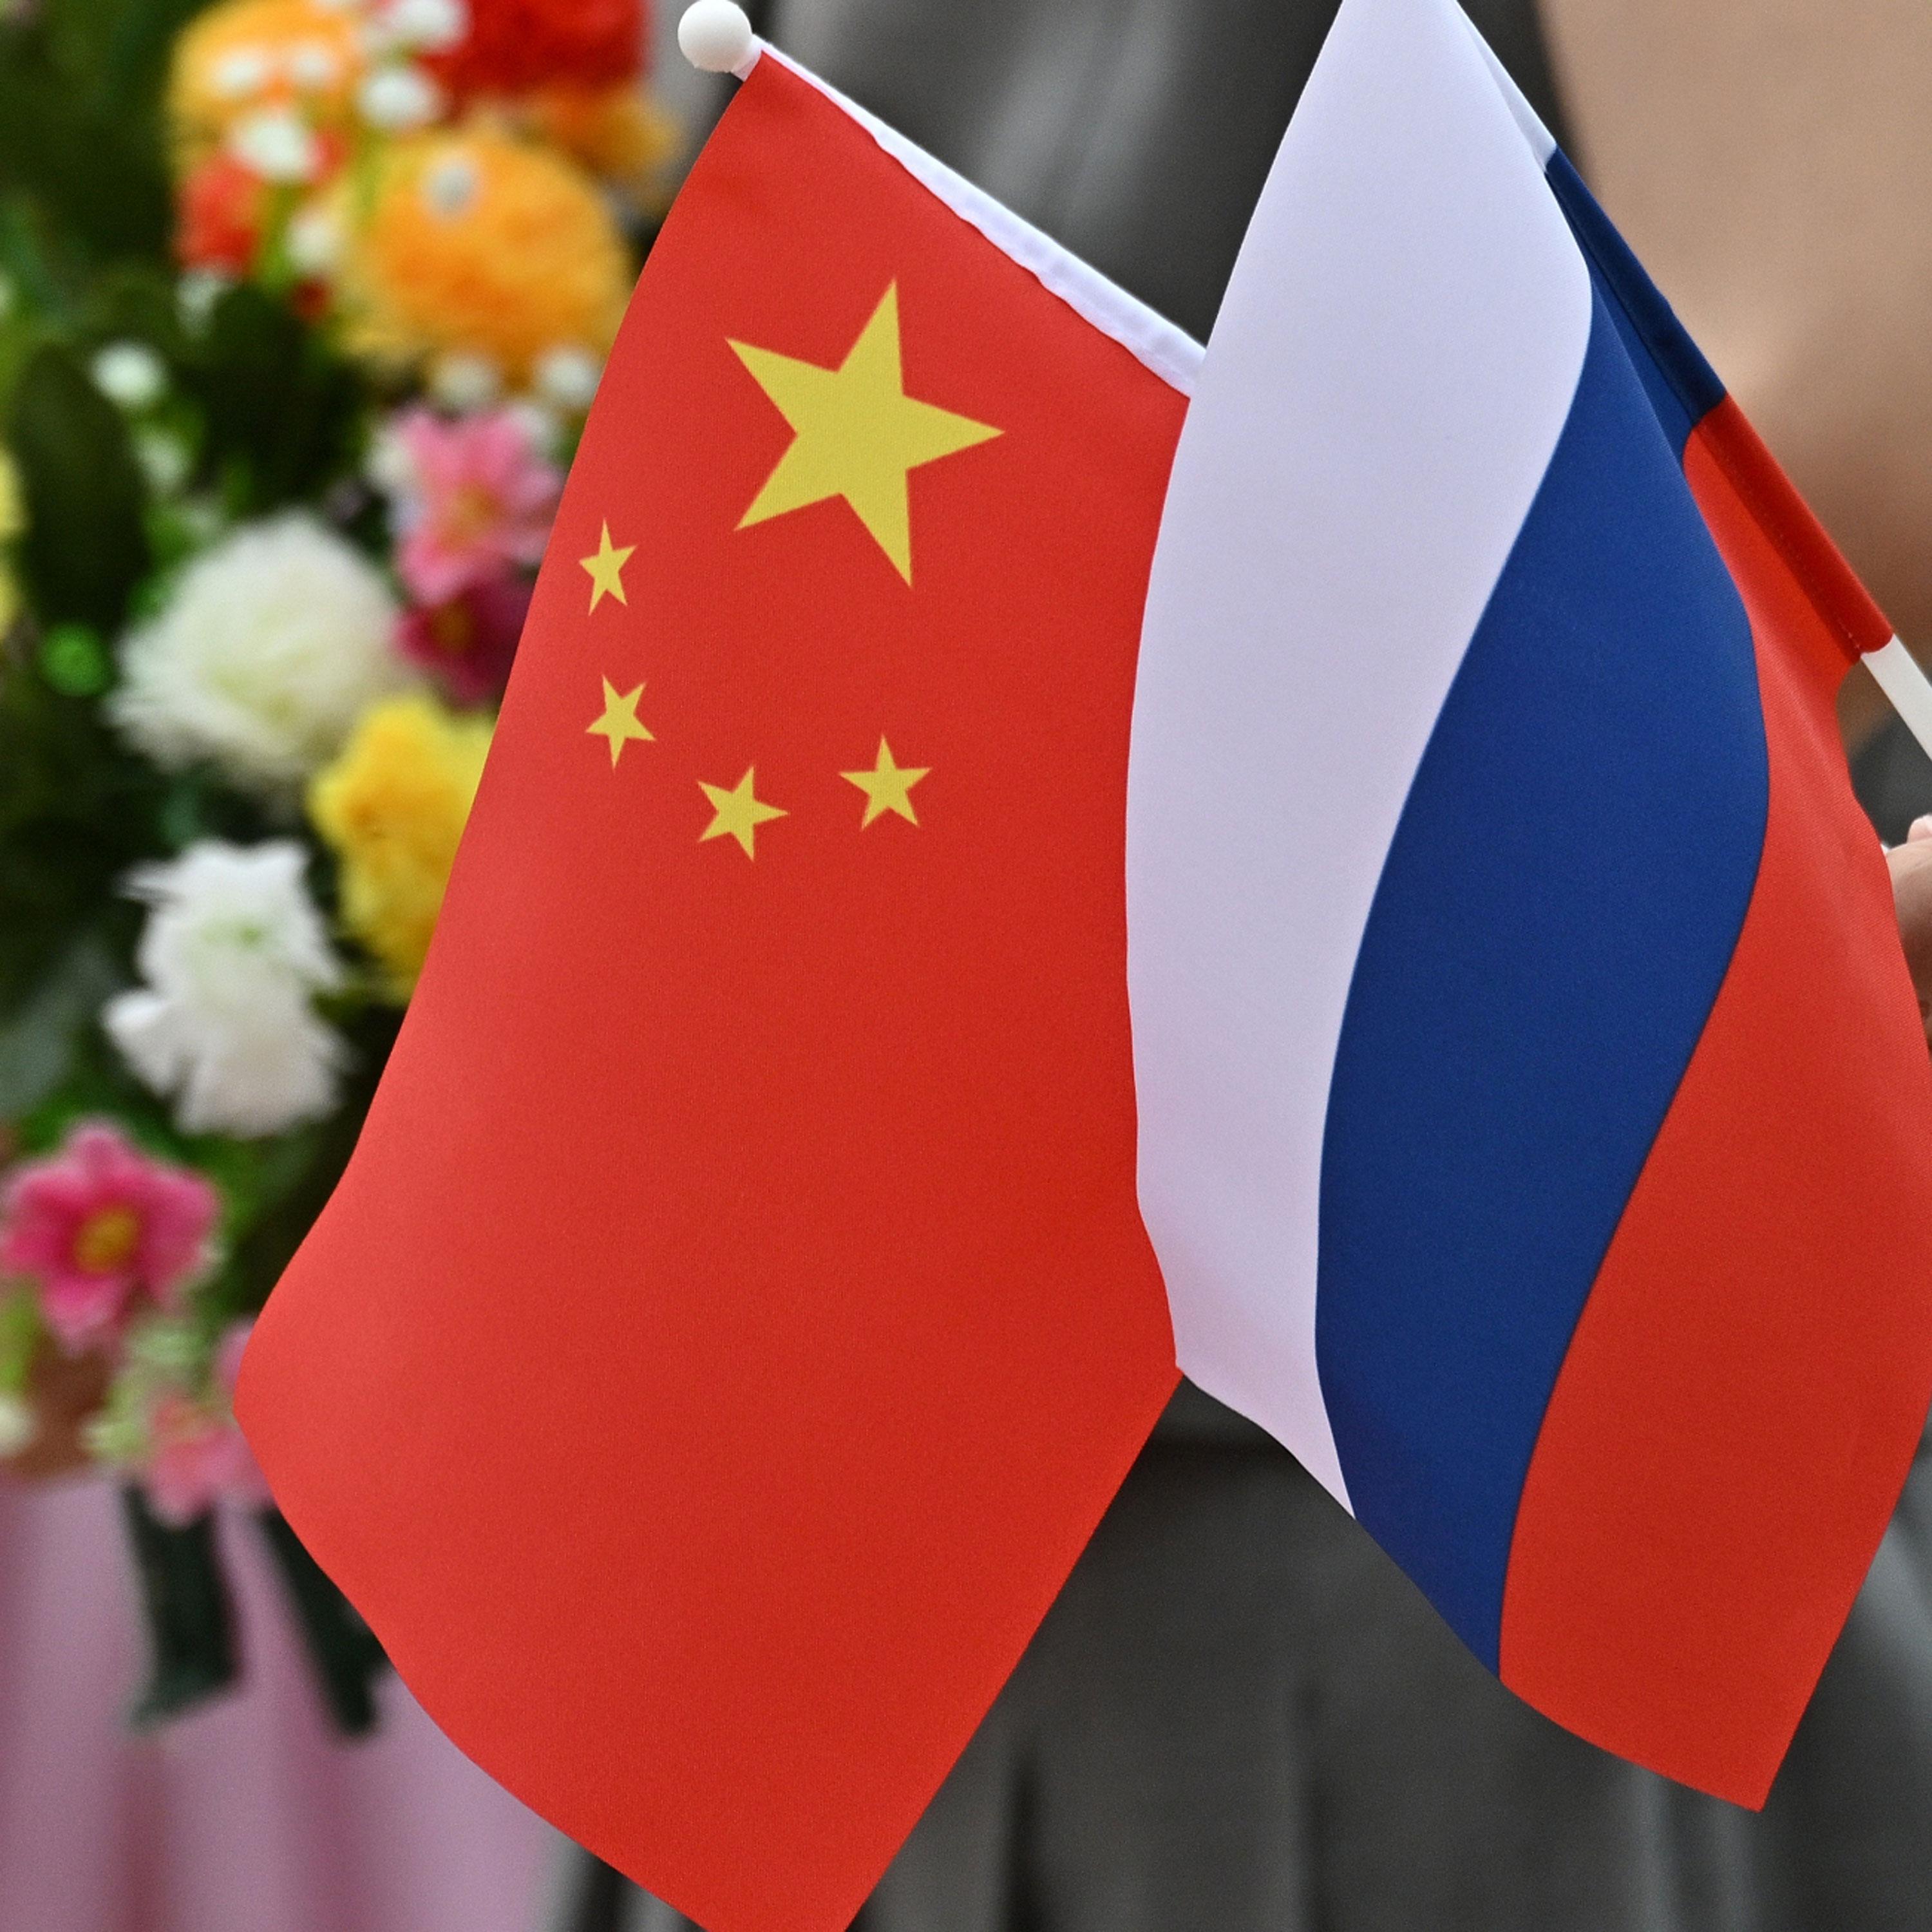 China, Russia pledge even closer ties 75 years after establishment of diplomatic relations